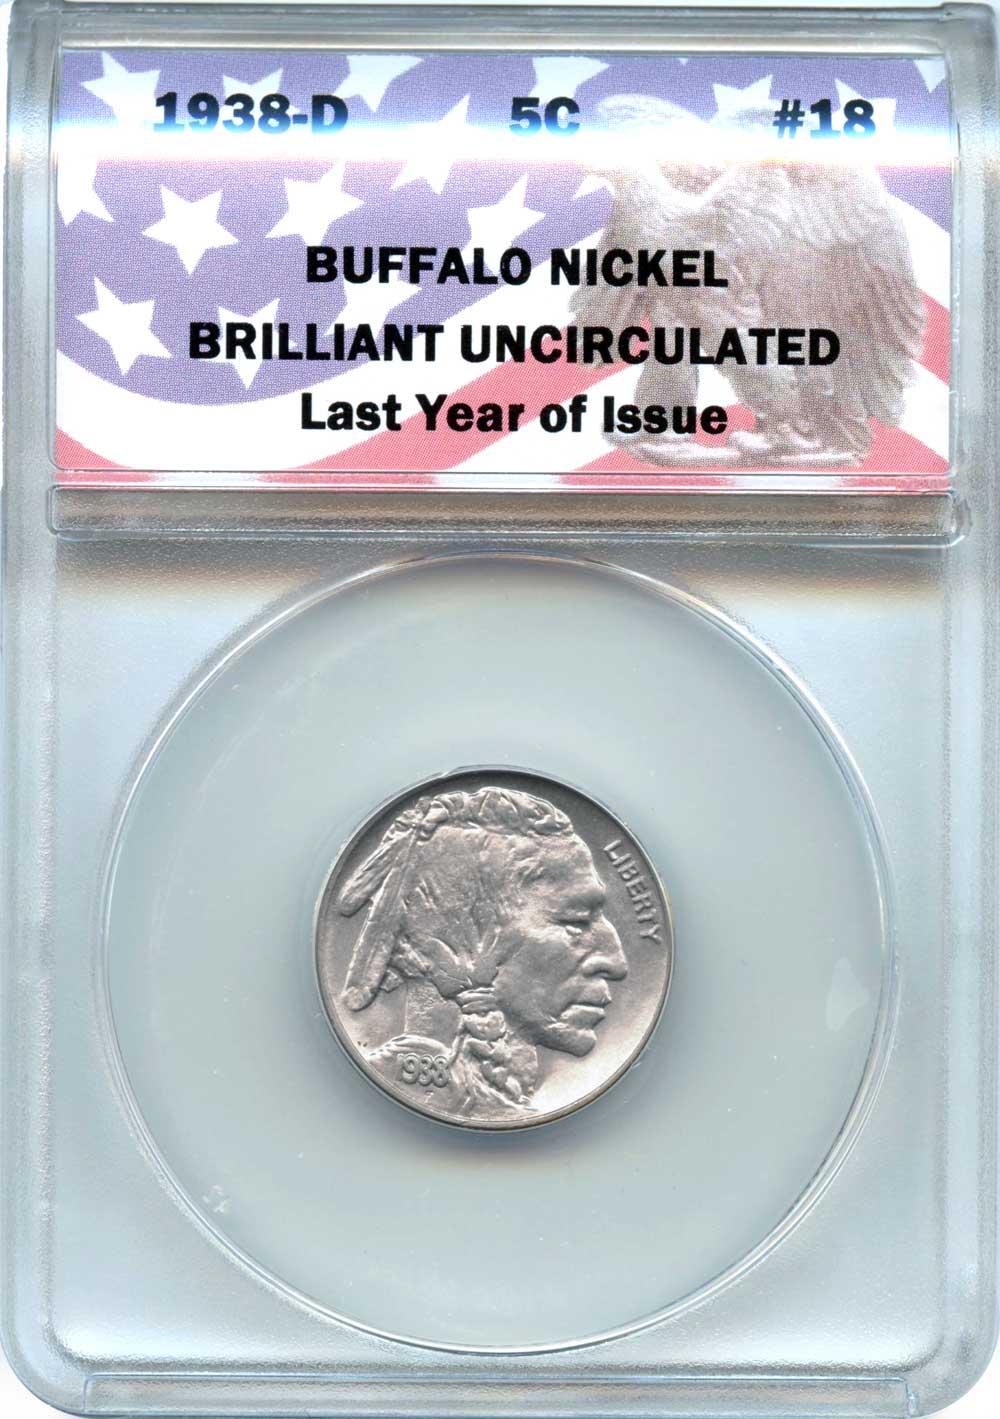 CollecTons Keepers #18: 1938-D Buffalo Nickel Certified in Exclusive ANACS Brilliant Uncirculated Holder